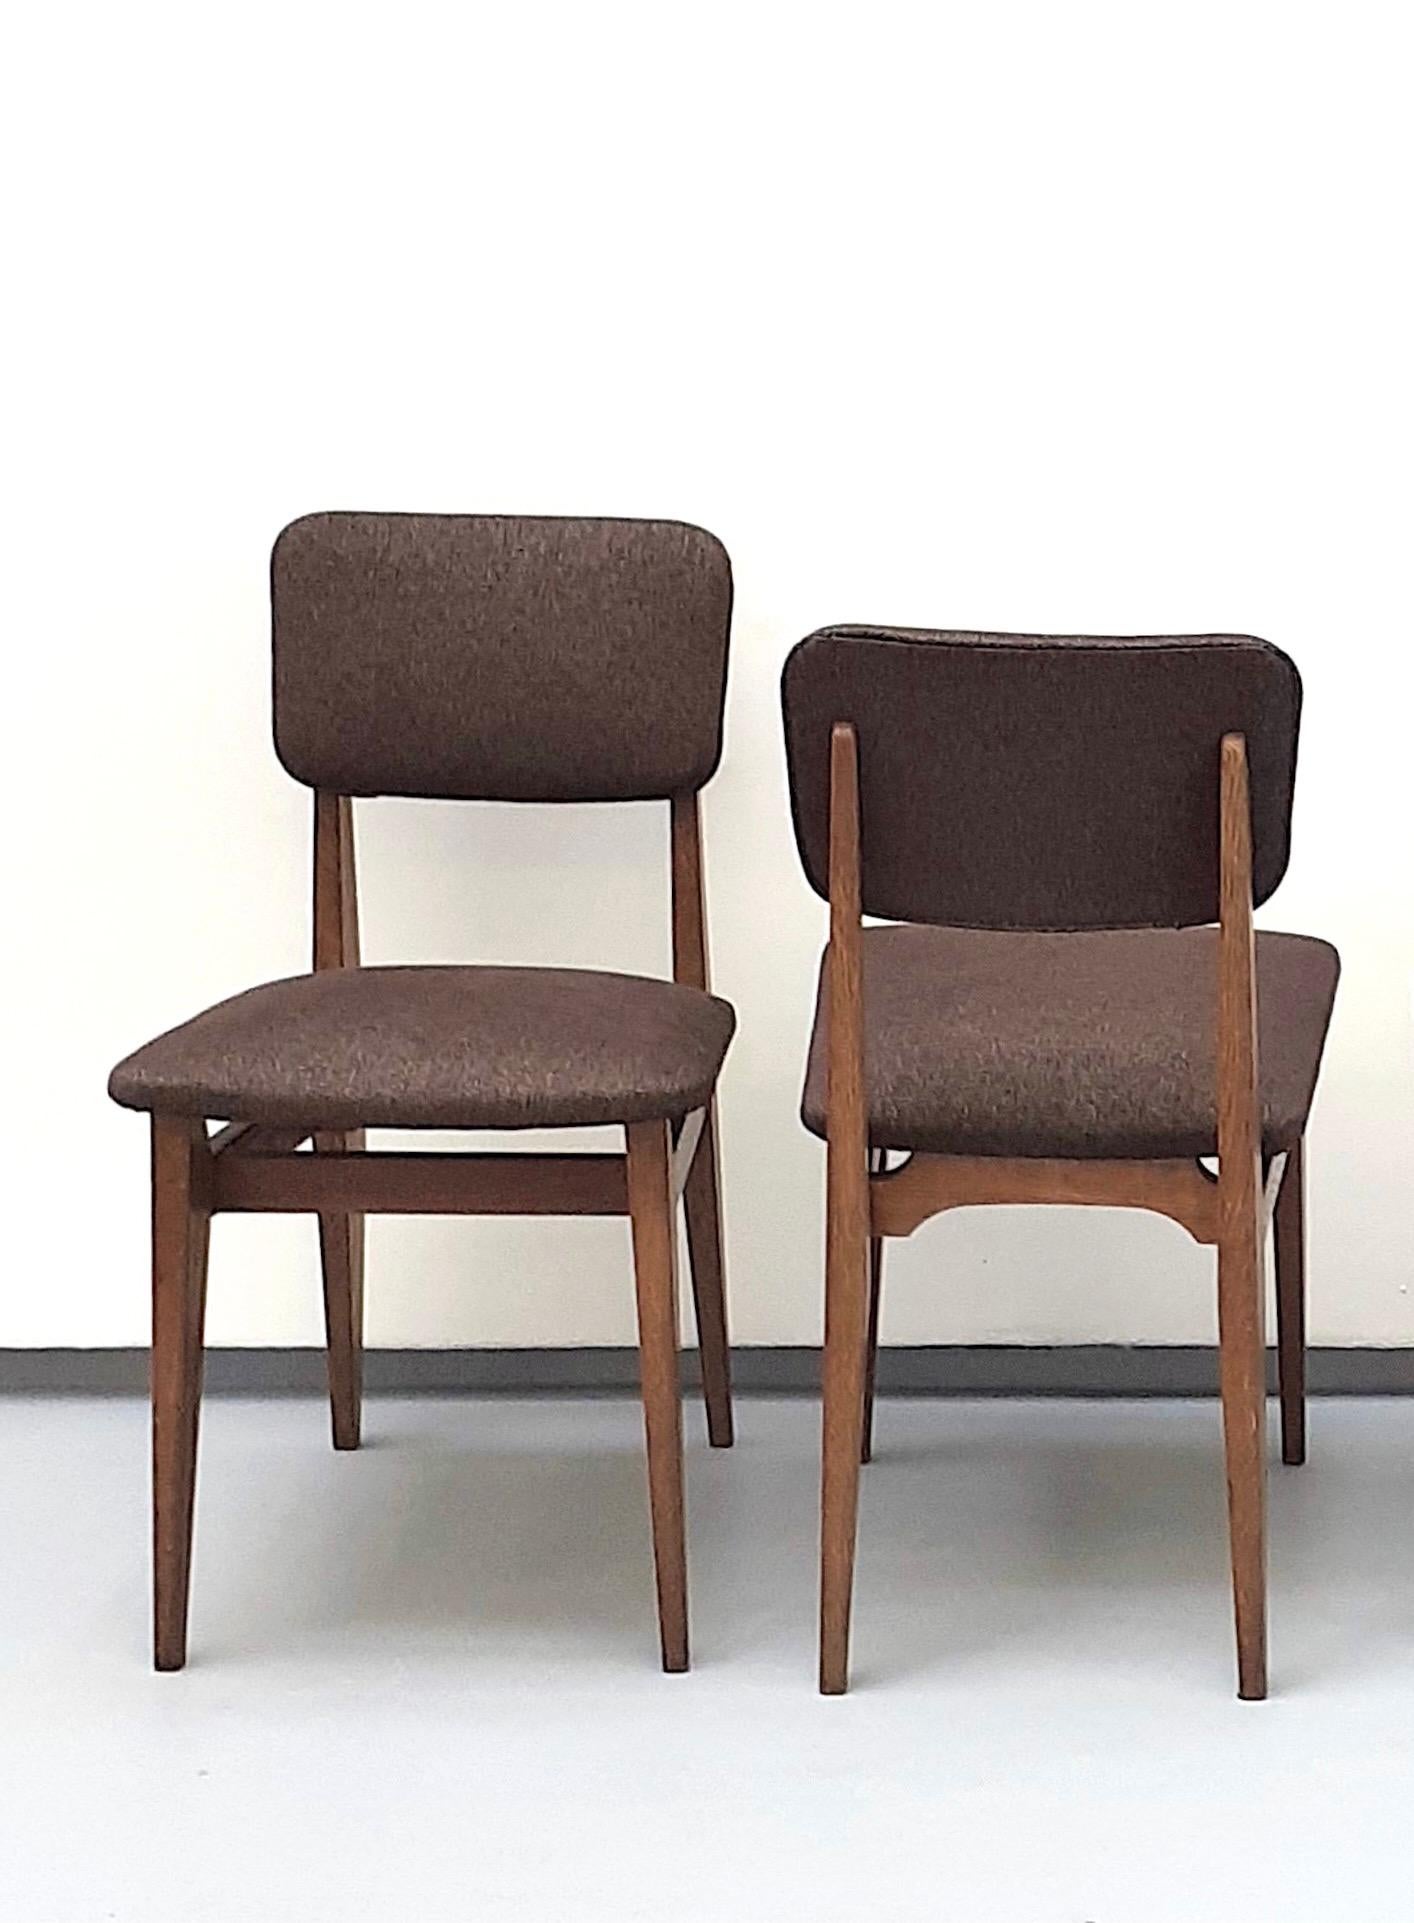 Mid-20th Century Set of 4 Wood and Fabric Chairs by Marcel Gascoin, Arhec, 1950s For Sale